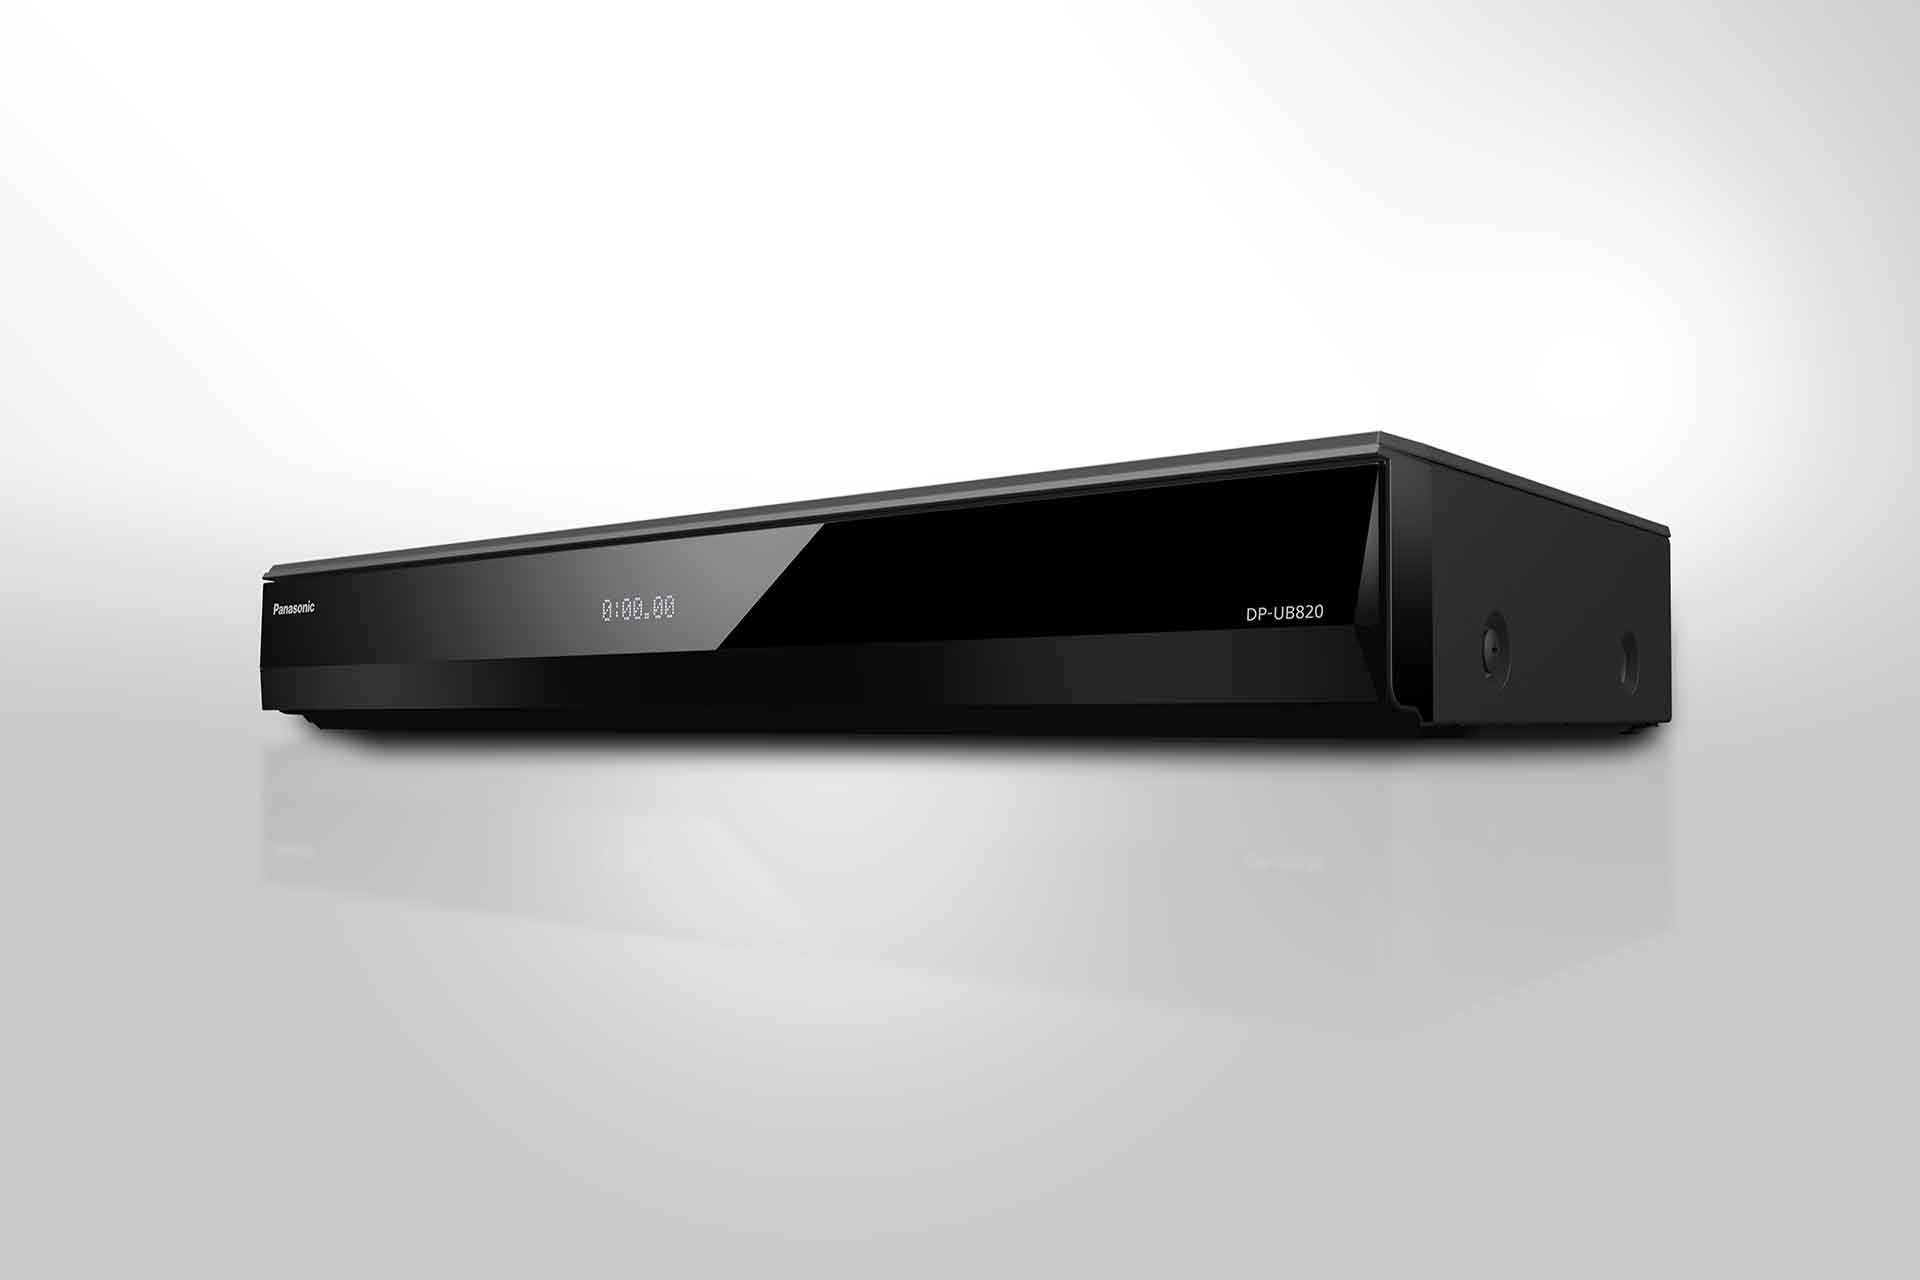 Sony BDP-S6700 Blu-ray Disc Player Reviewed - Future Audiophile Magazine